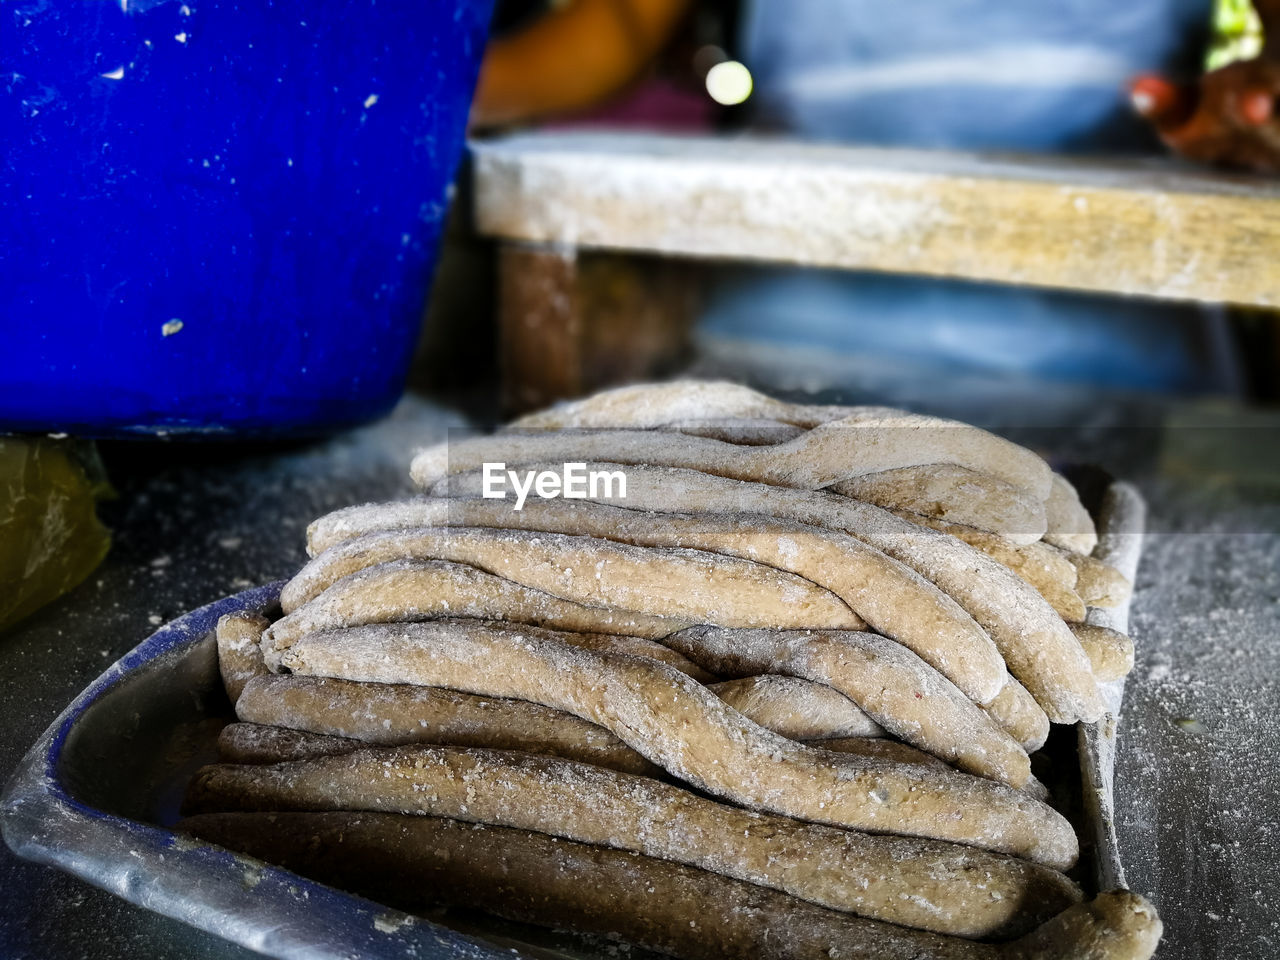 Unidentified hand is making a keropok lekor, a local delicacy made from fish and starch.